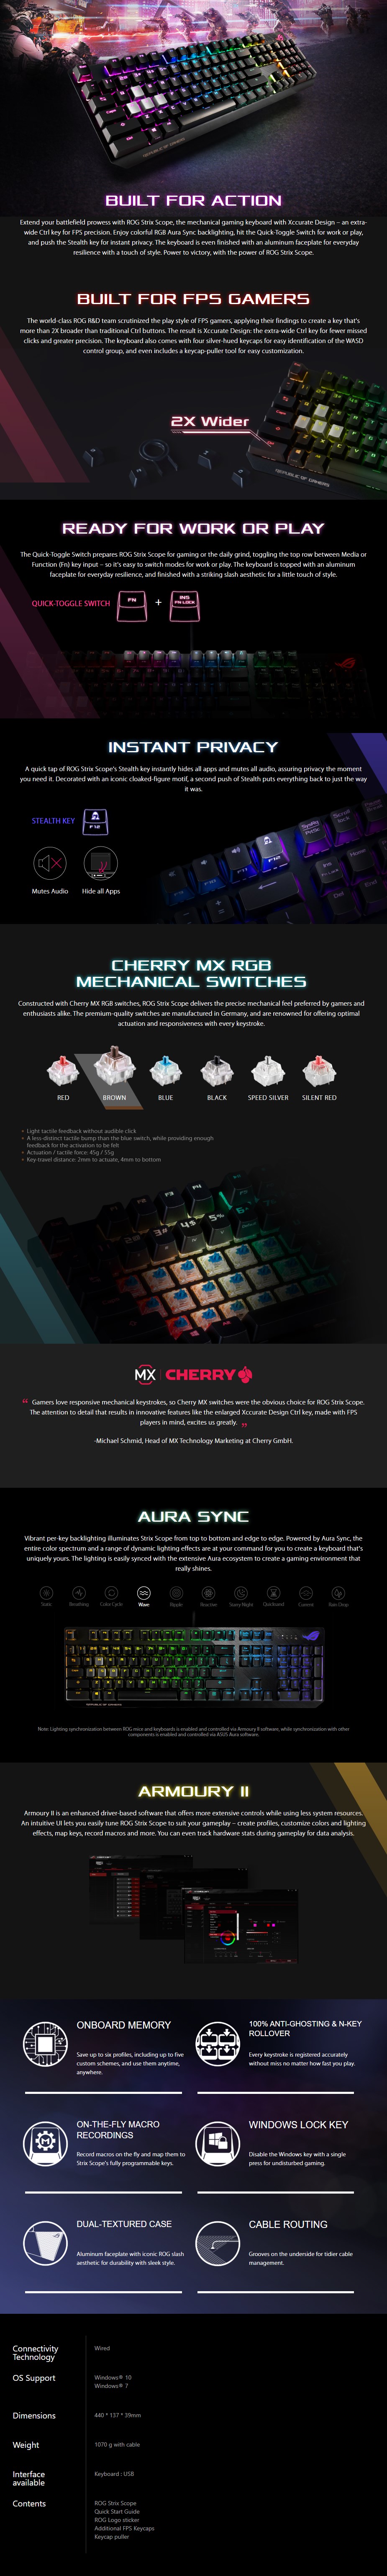 ASUS ROG Strix Scope RGB Mechanical Gaming Keyboard - Cherry MX Silver - Overview 1